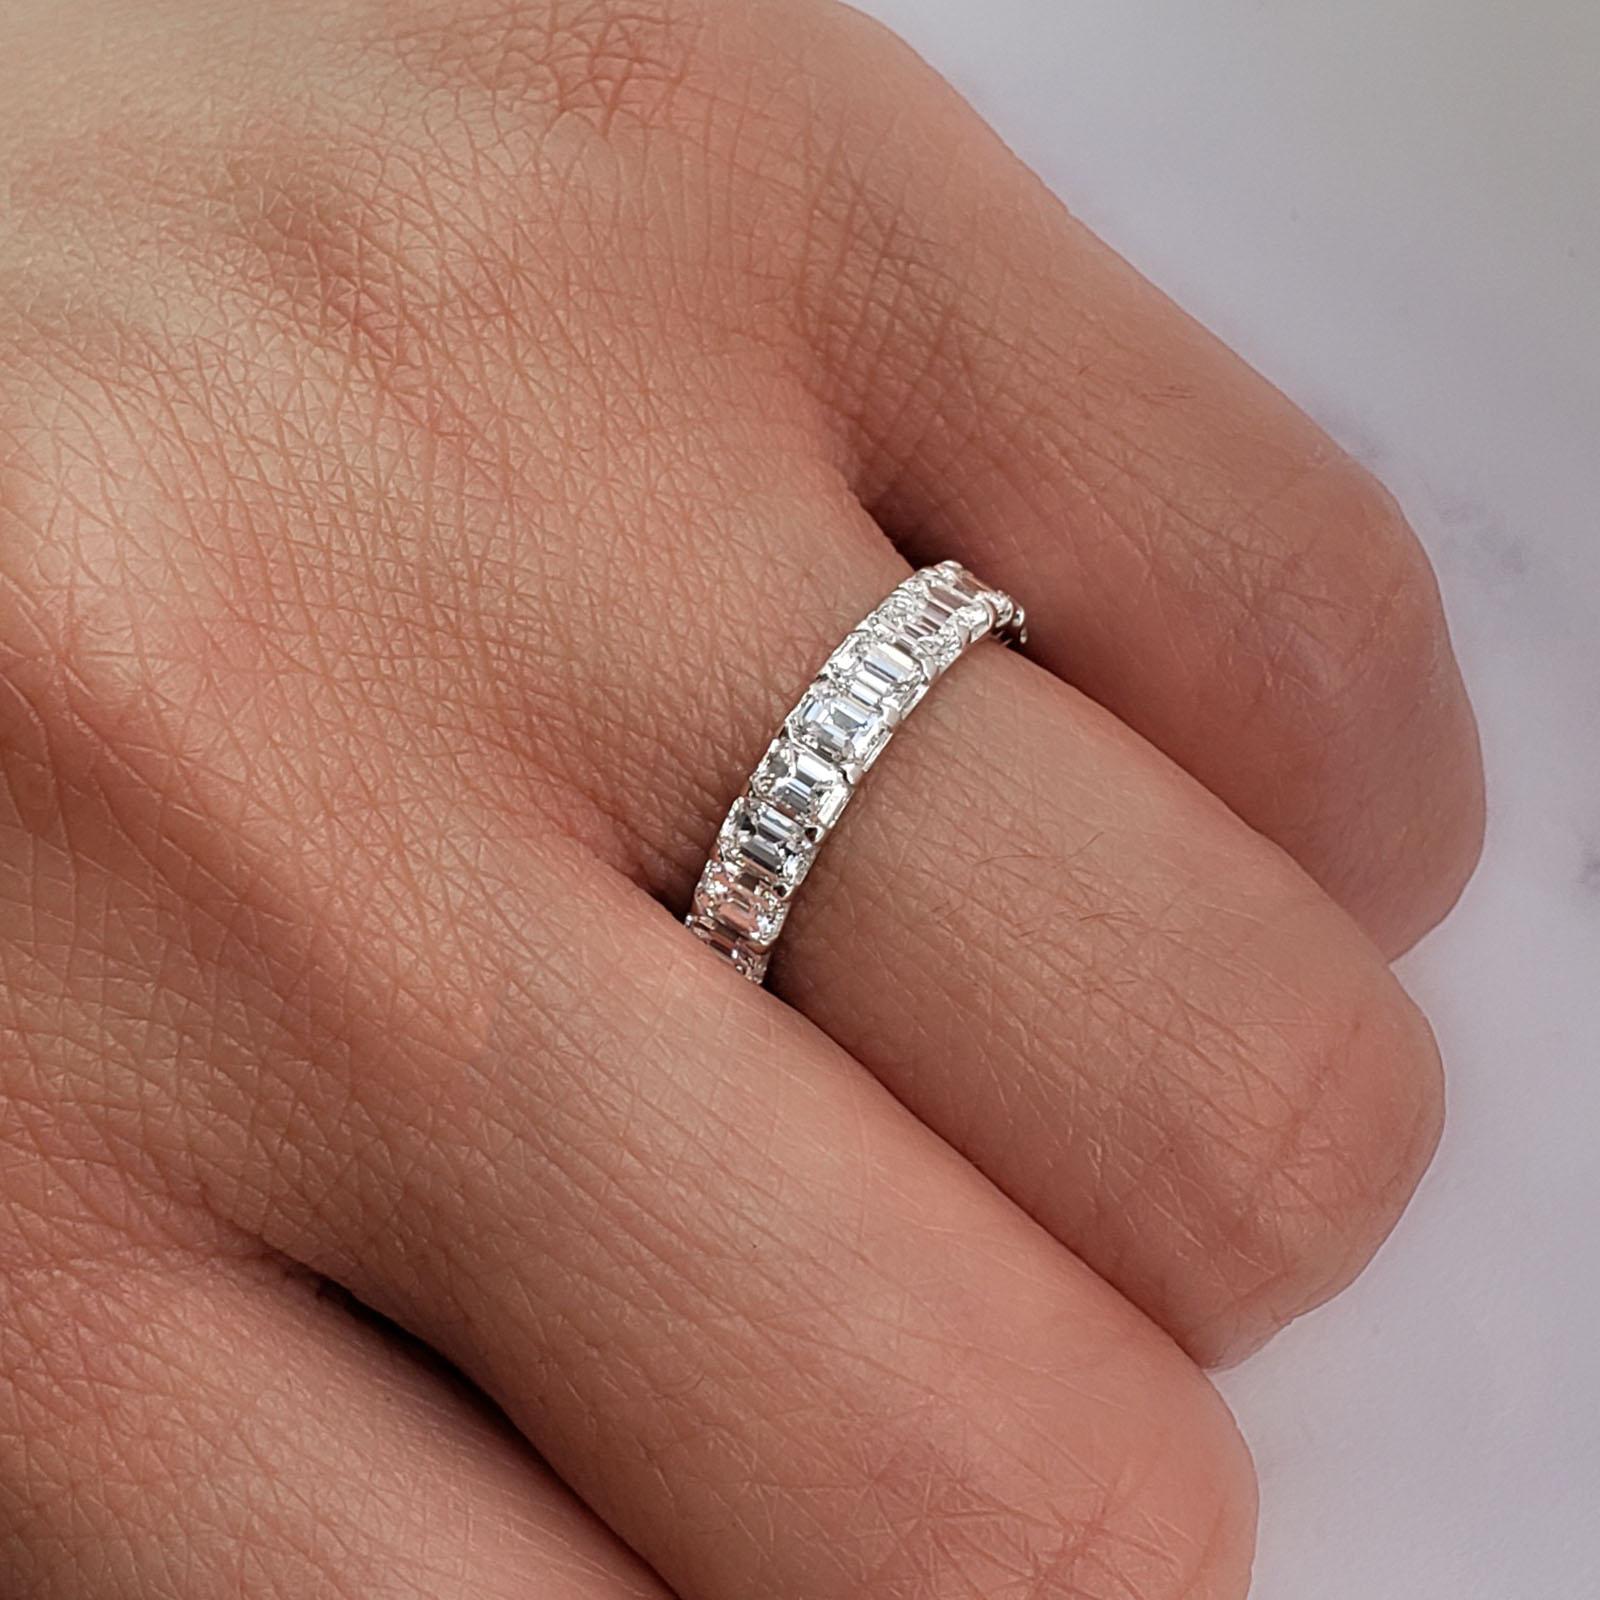 For Sale:  3ctw Emerald Cut Eternity Band Shared Prong Design F-G Color VS1 Clarity Plat 5